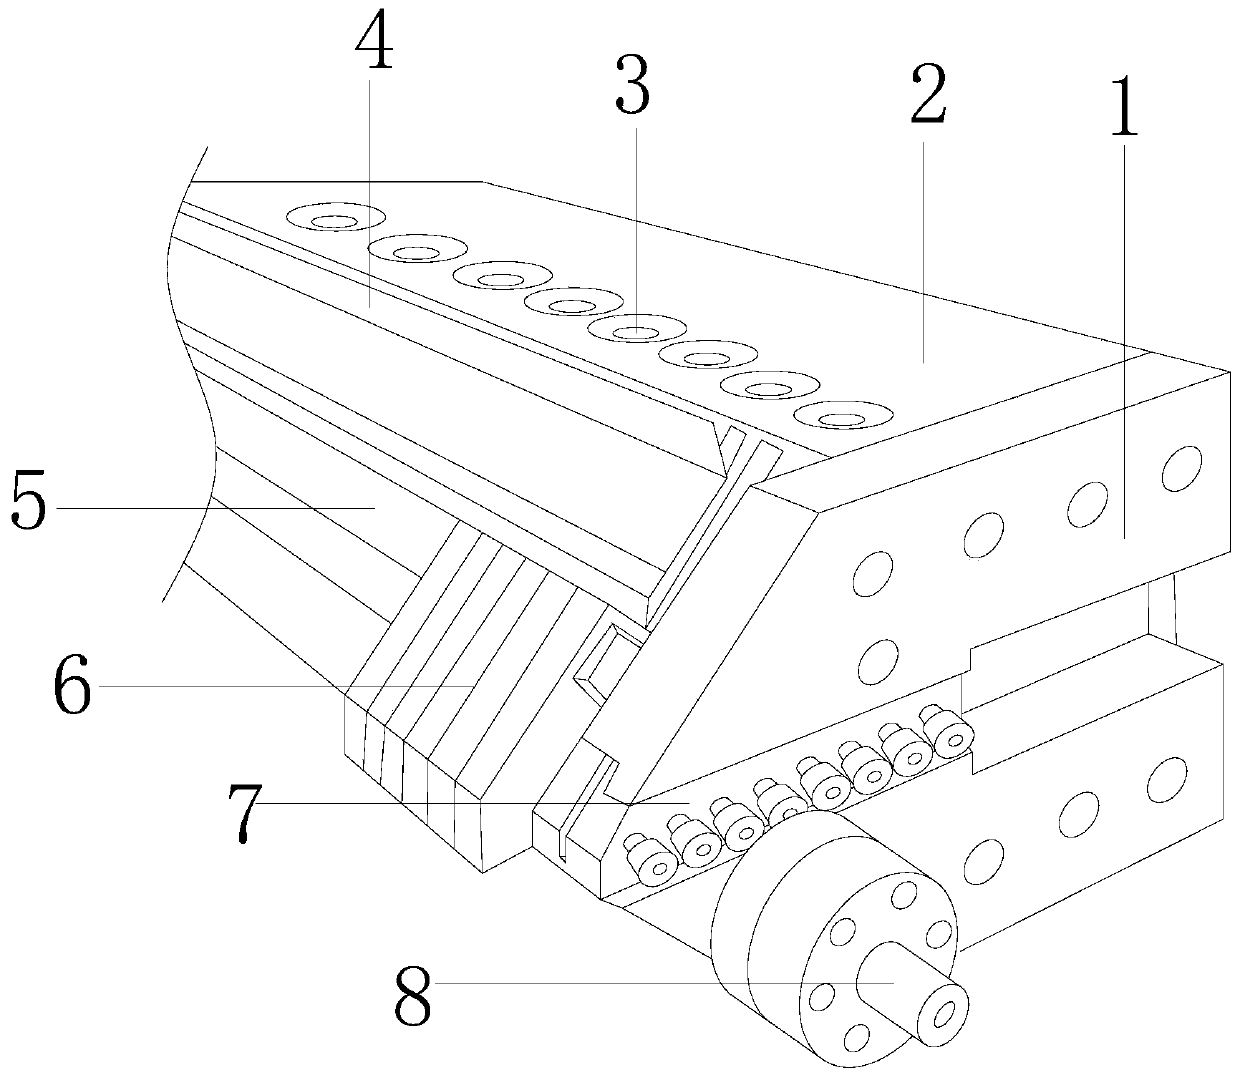 Gradient type top-pressure plate extrusion mold based on special-shaped marine plate